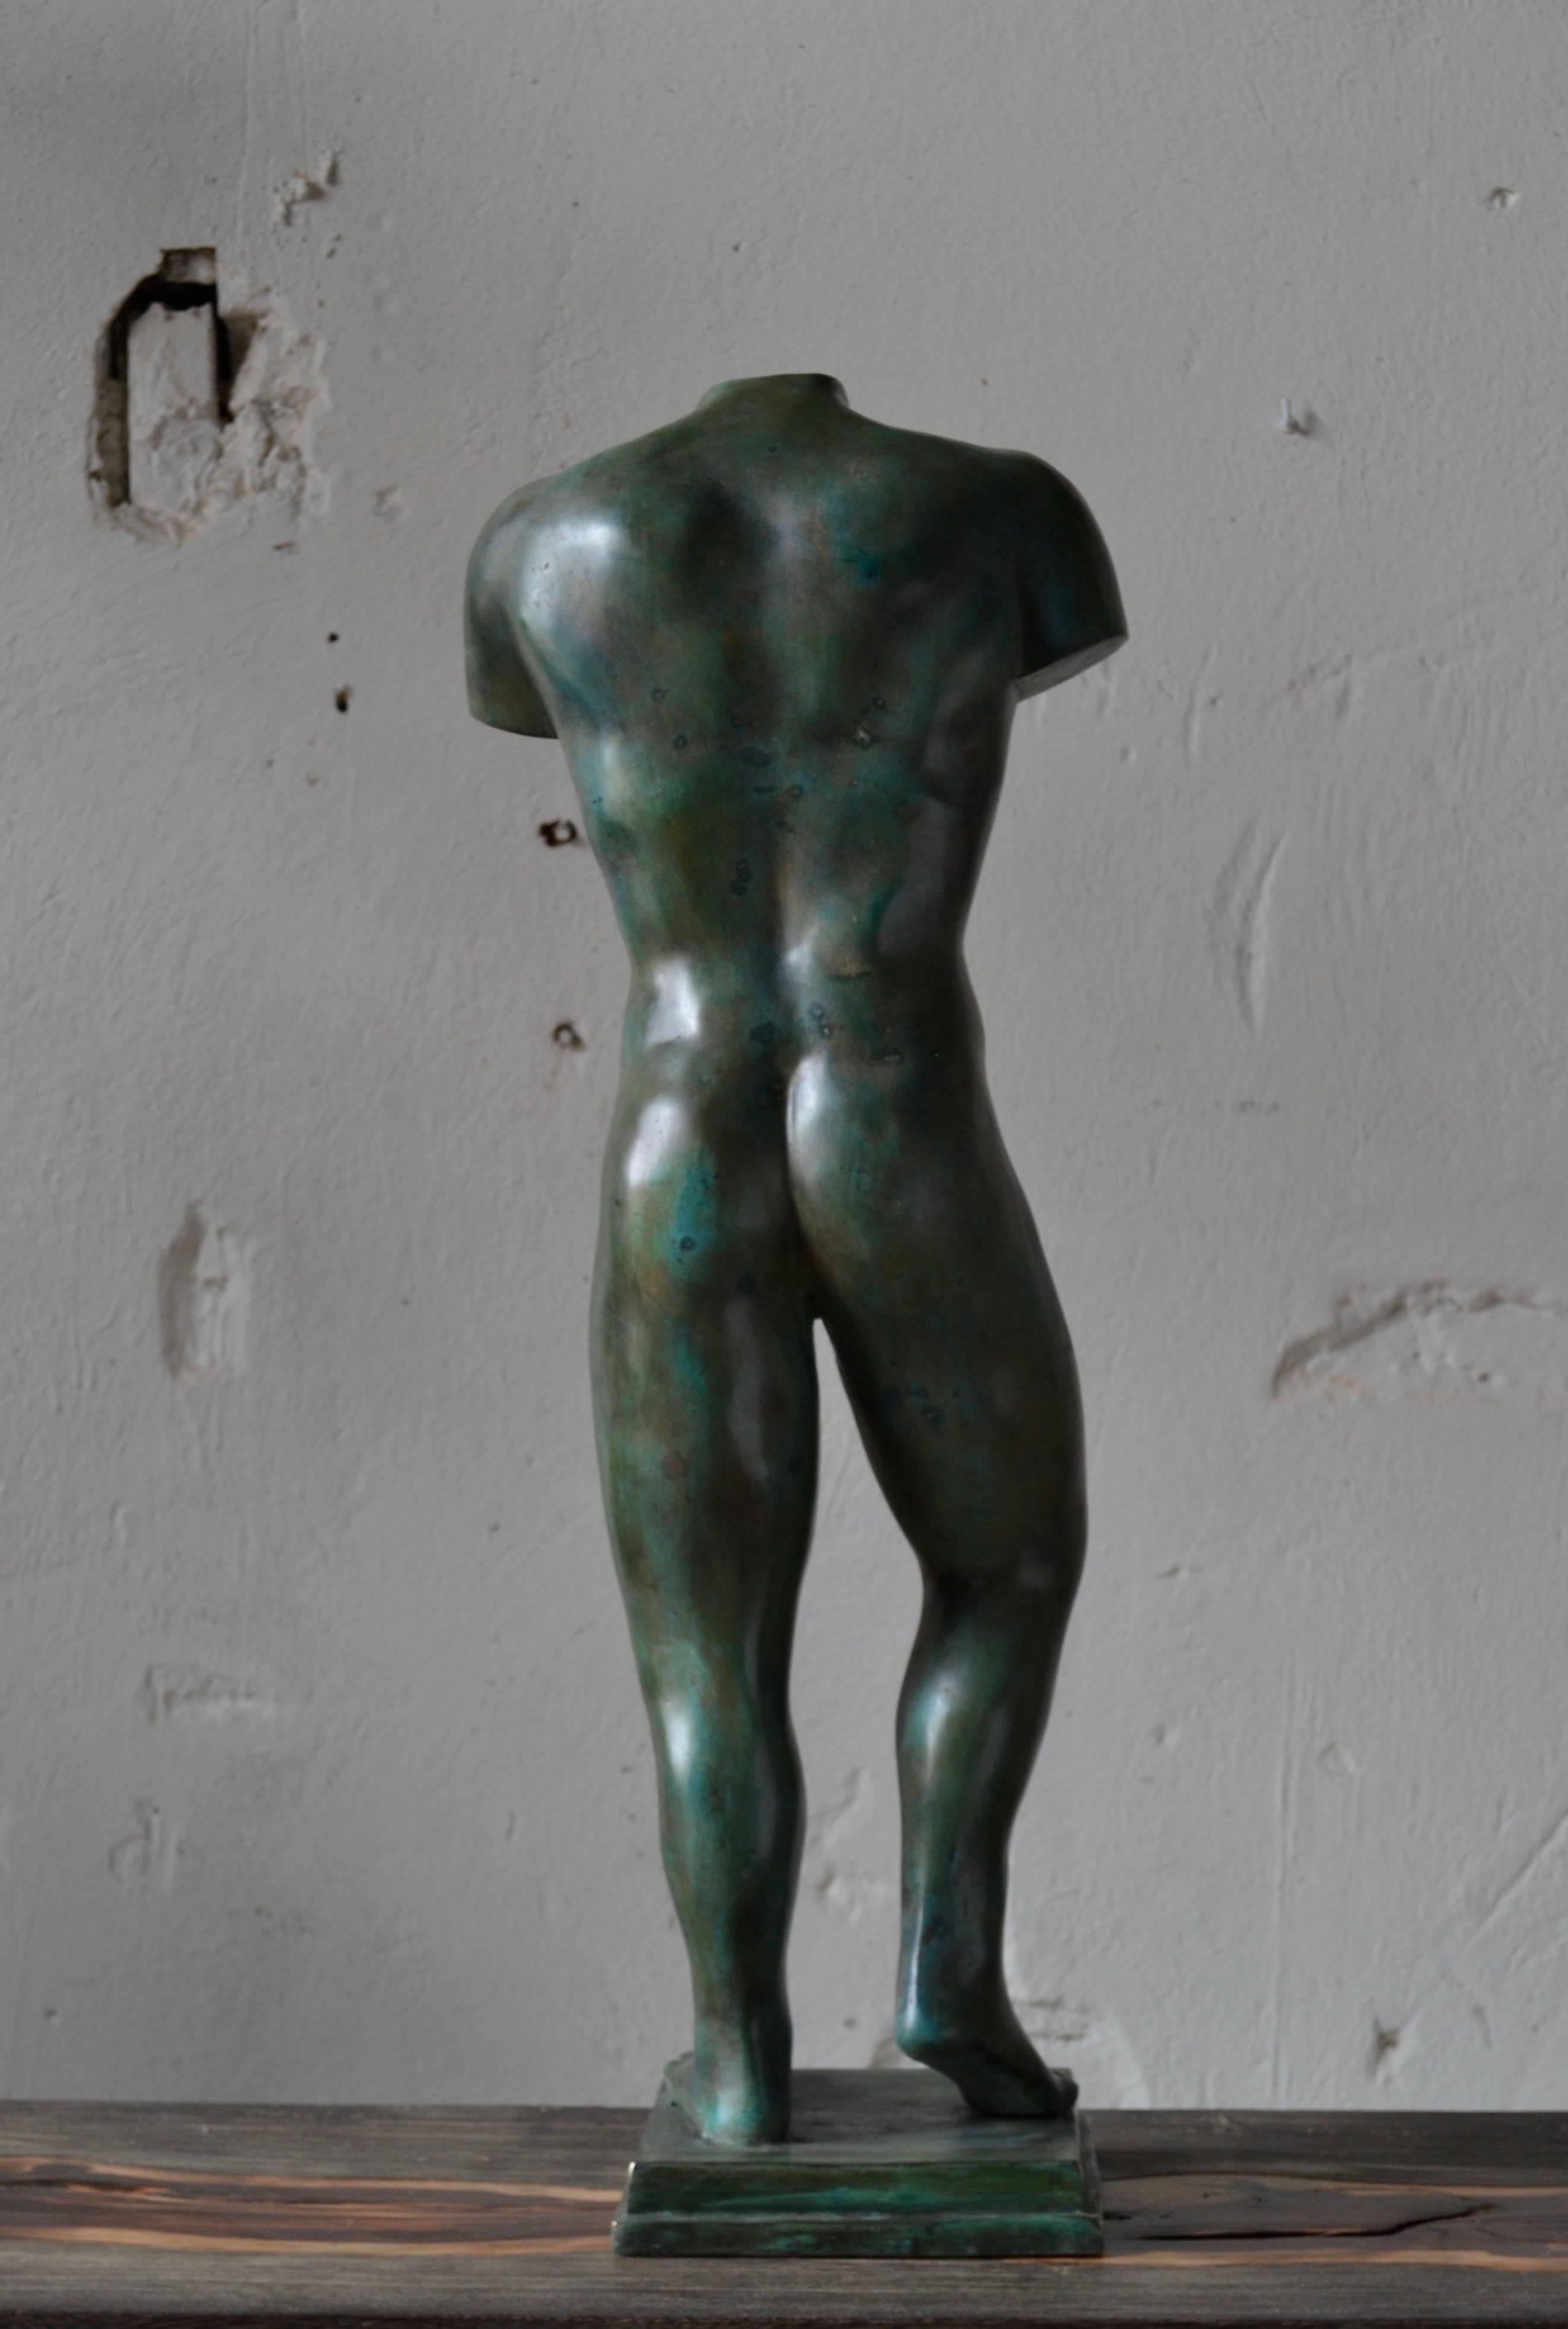 Male Torso sculpture in patinated bronze
Excellent patina and the sculpture is in an unusual size, larger than most.
This piece will enhance any environment.
   